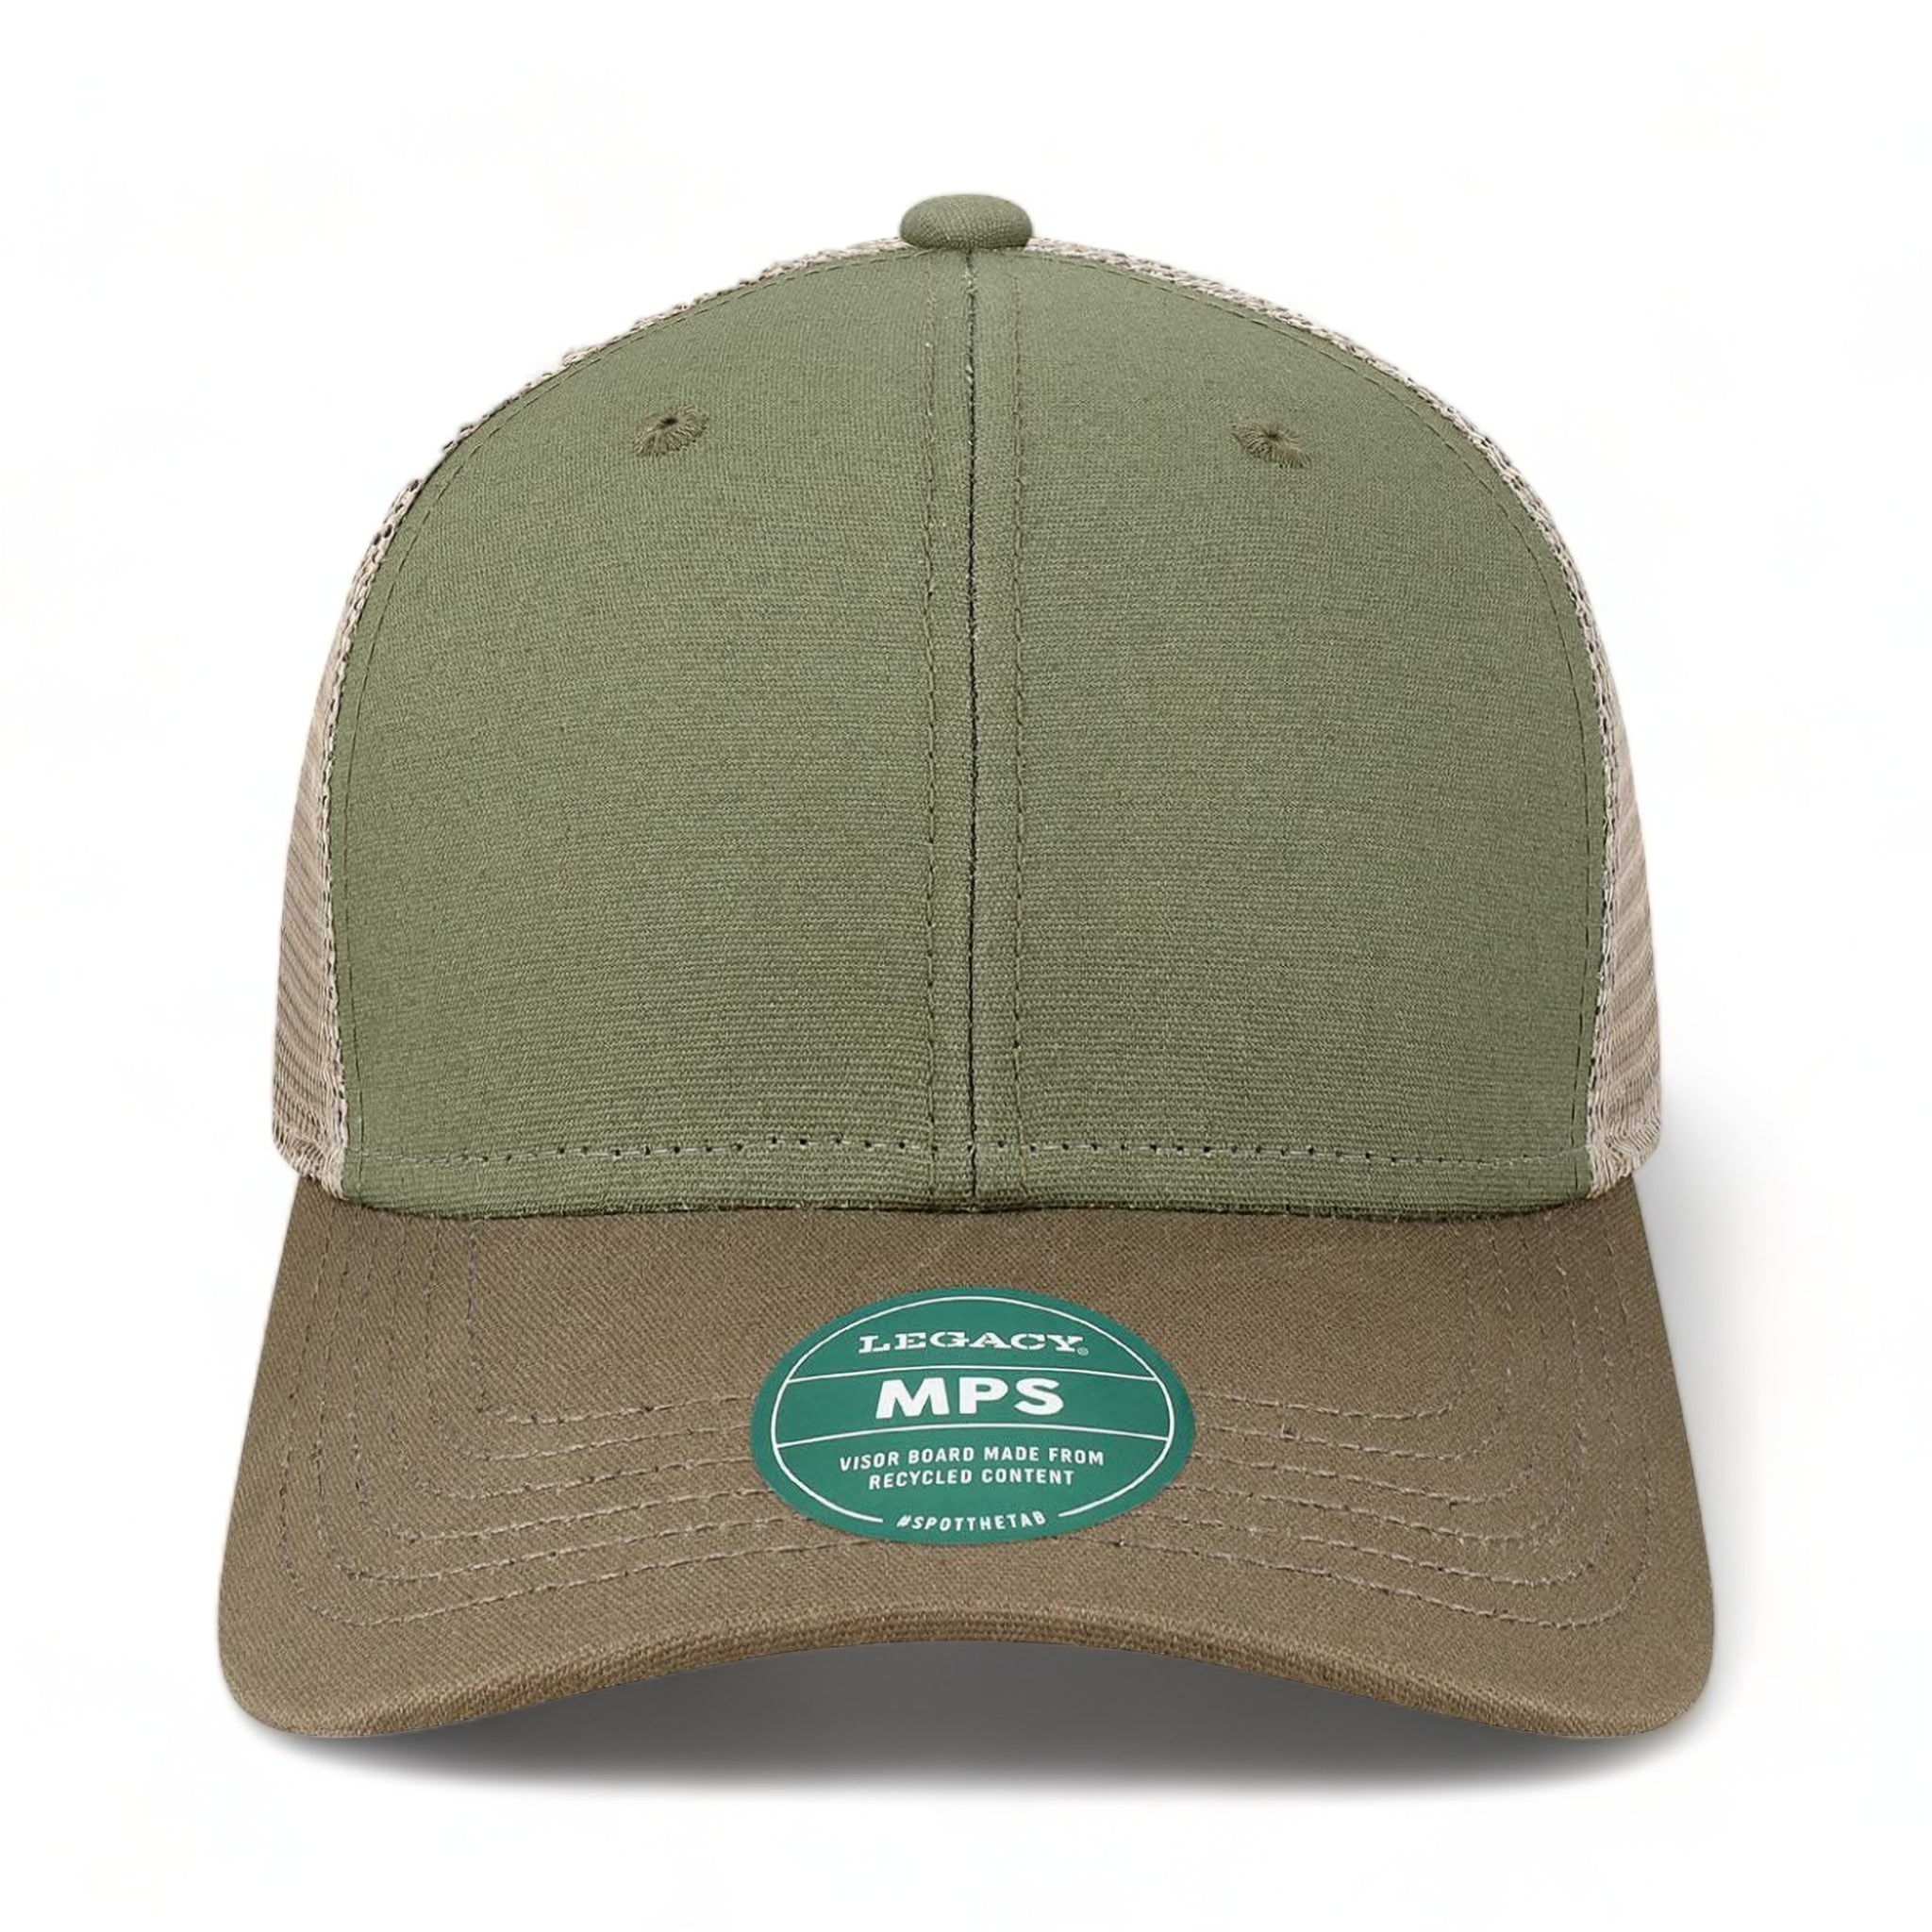 Front view of LEGACY MPS custom hat in olive, dark olive and dark khaki